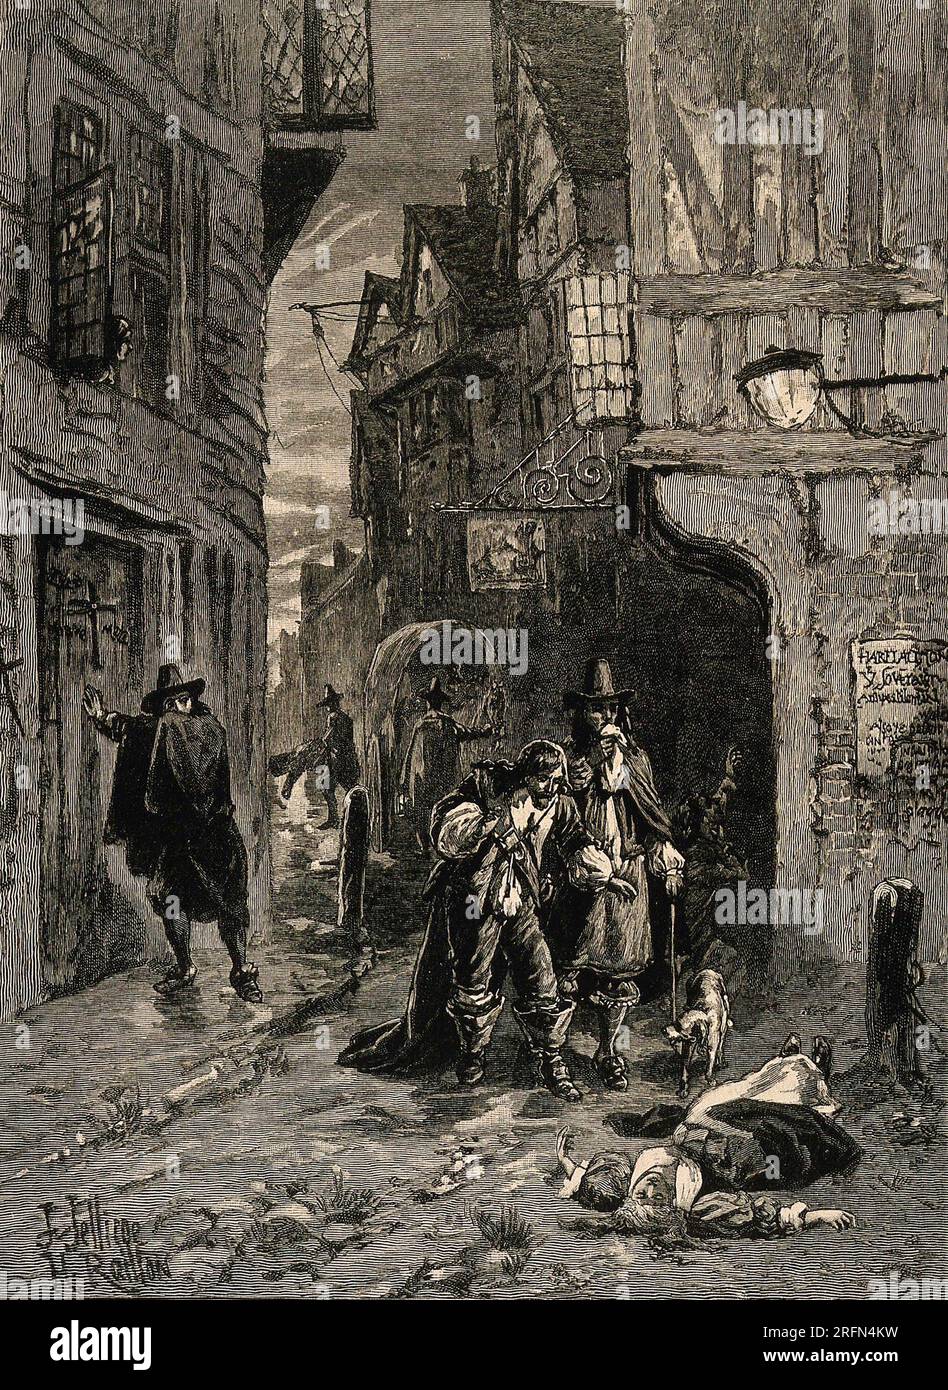 Two Men Discovering A Dead Woman In The Street During The Great Plague Of London 1664 66 Wood 1605